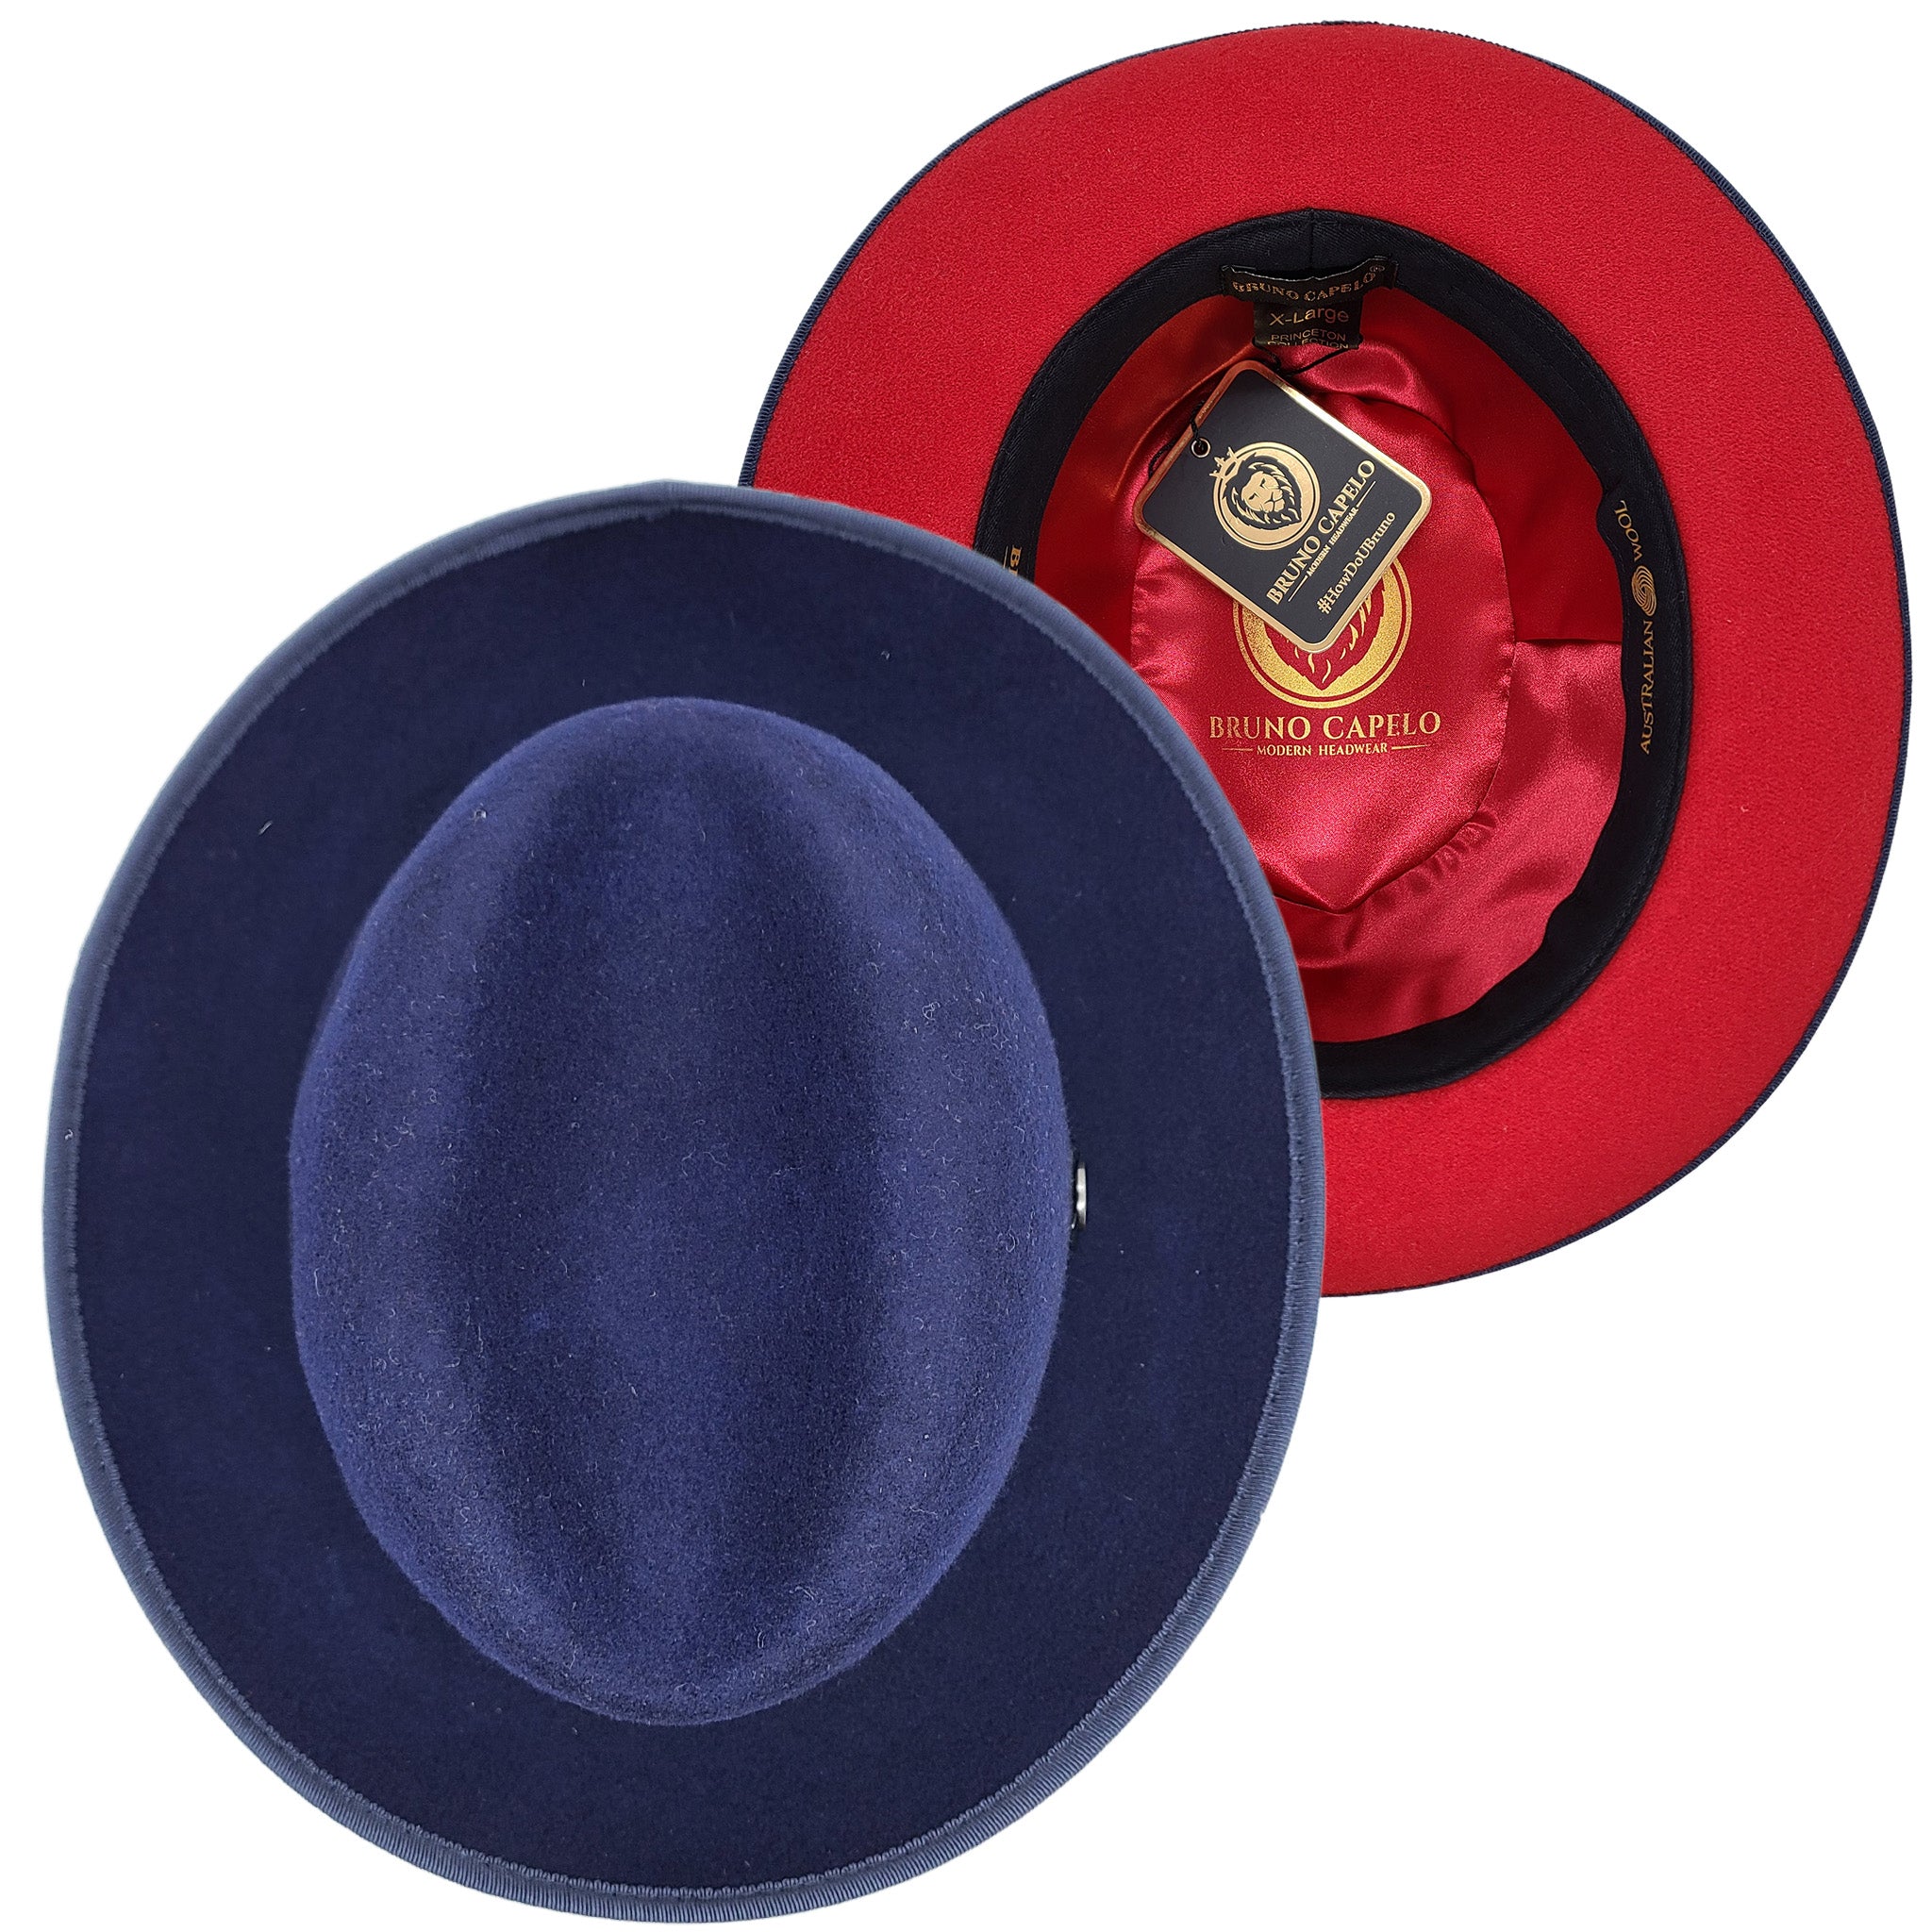 Navy/Red Contrast Bottom Hat